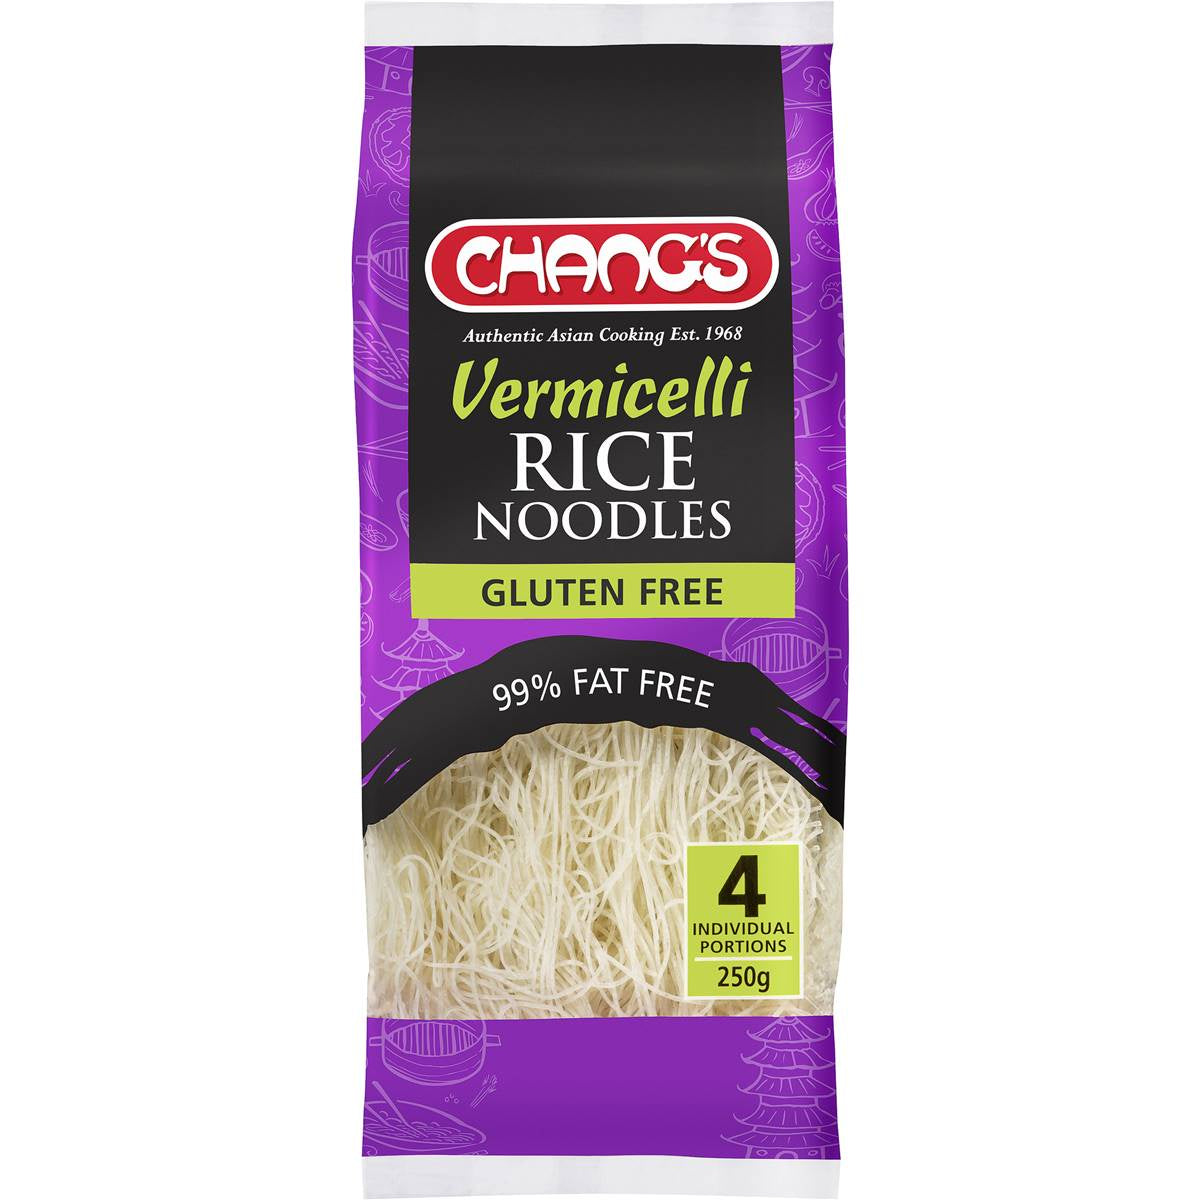 Changs Vermicelli Rice Noodles Gluten Free 250g